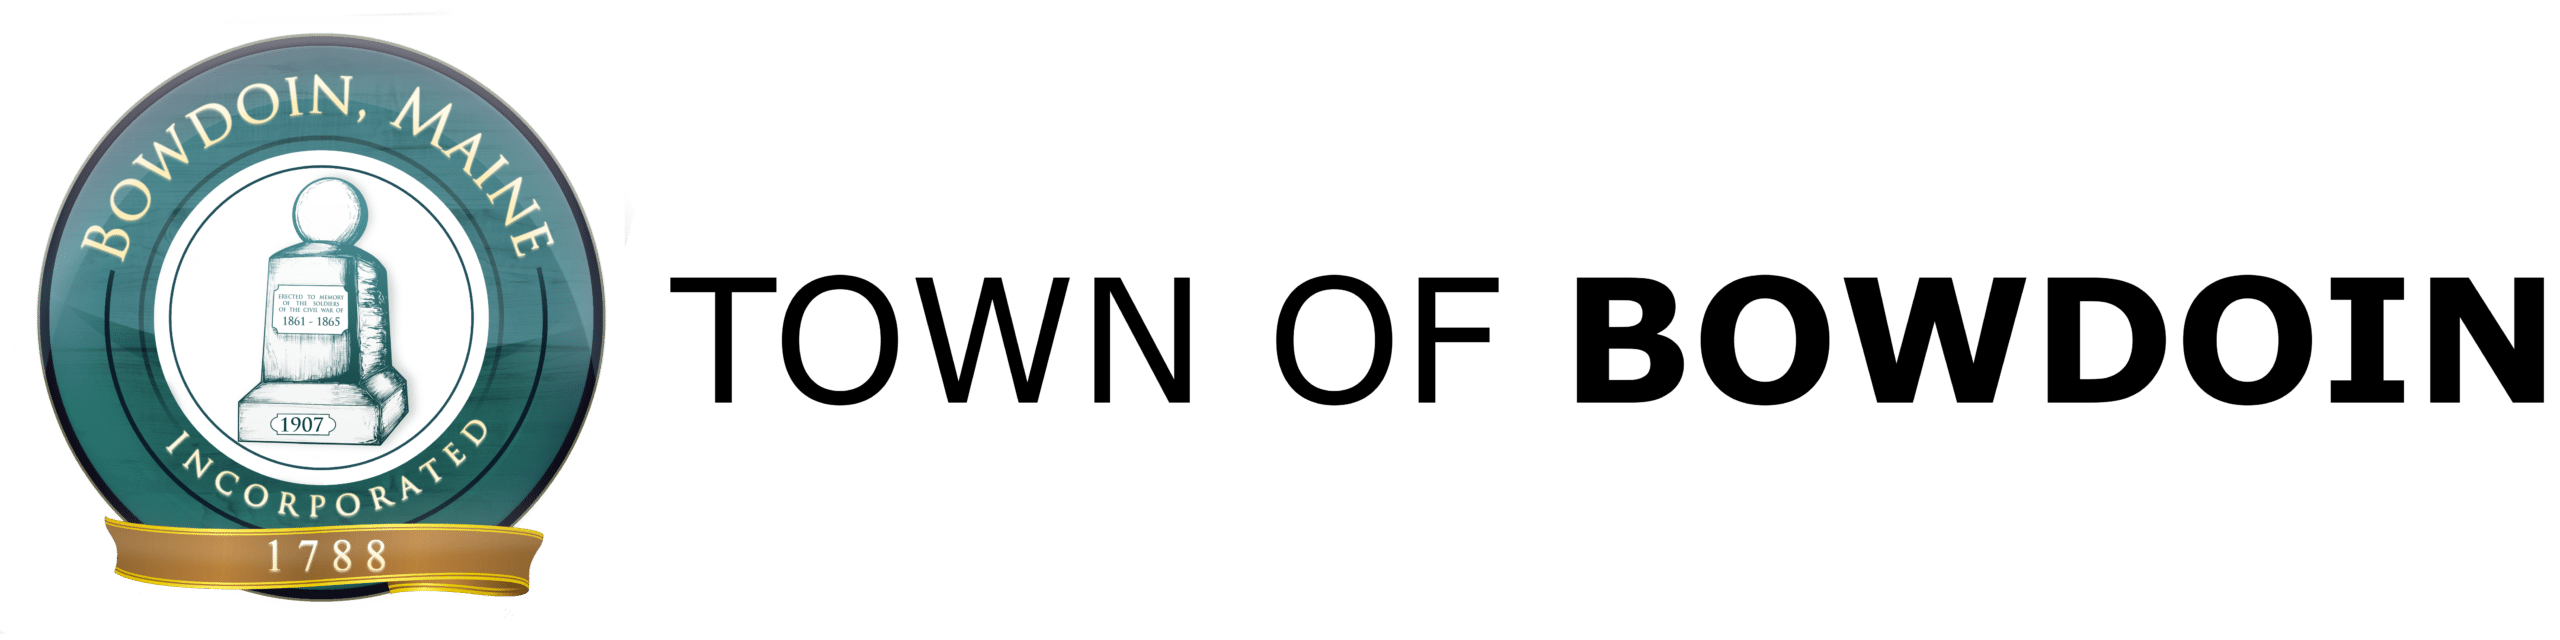 Logo for Town of Bowdoin, Maine